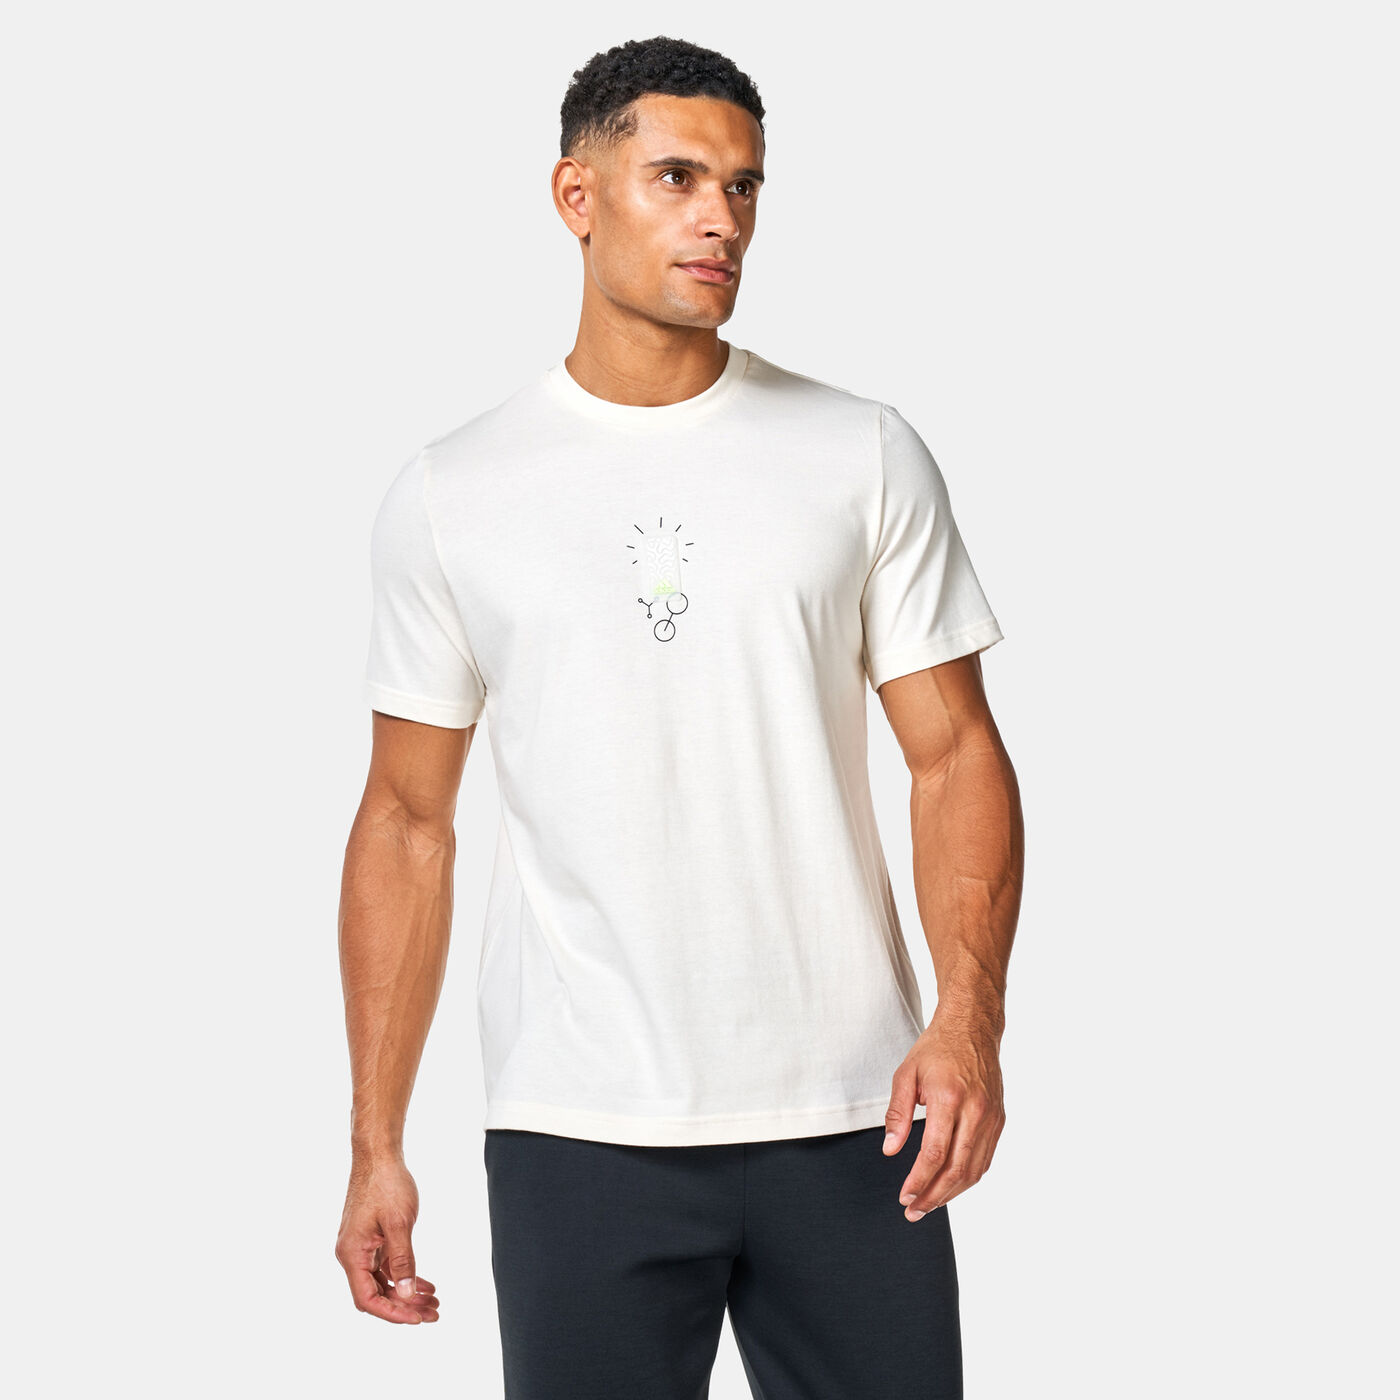 Men's Molded Linear Graphic T-Shirt